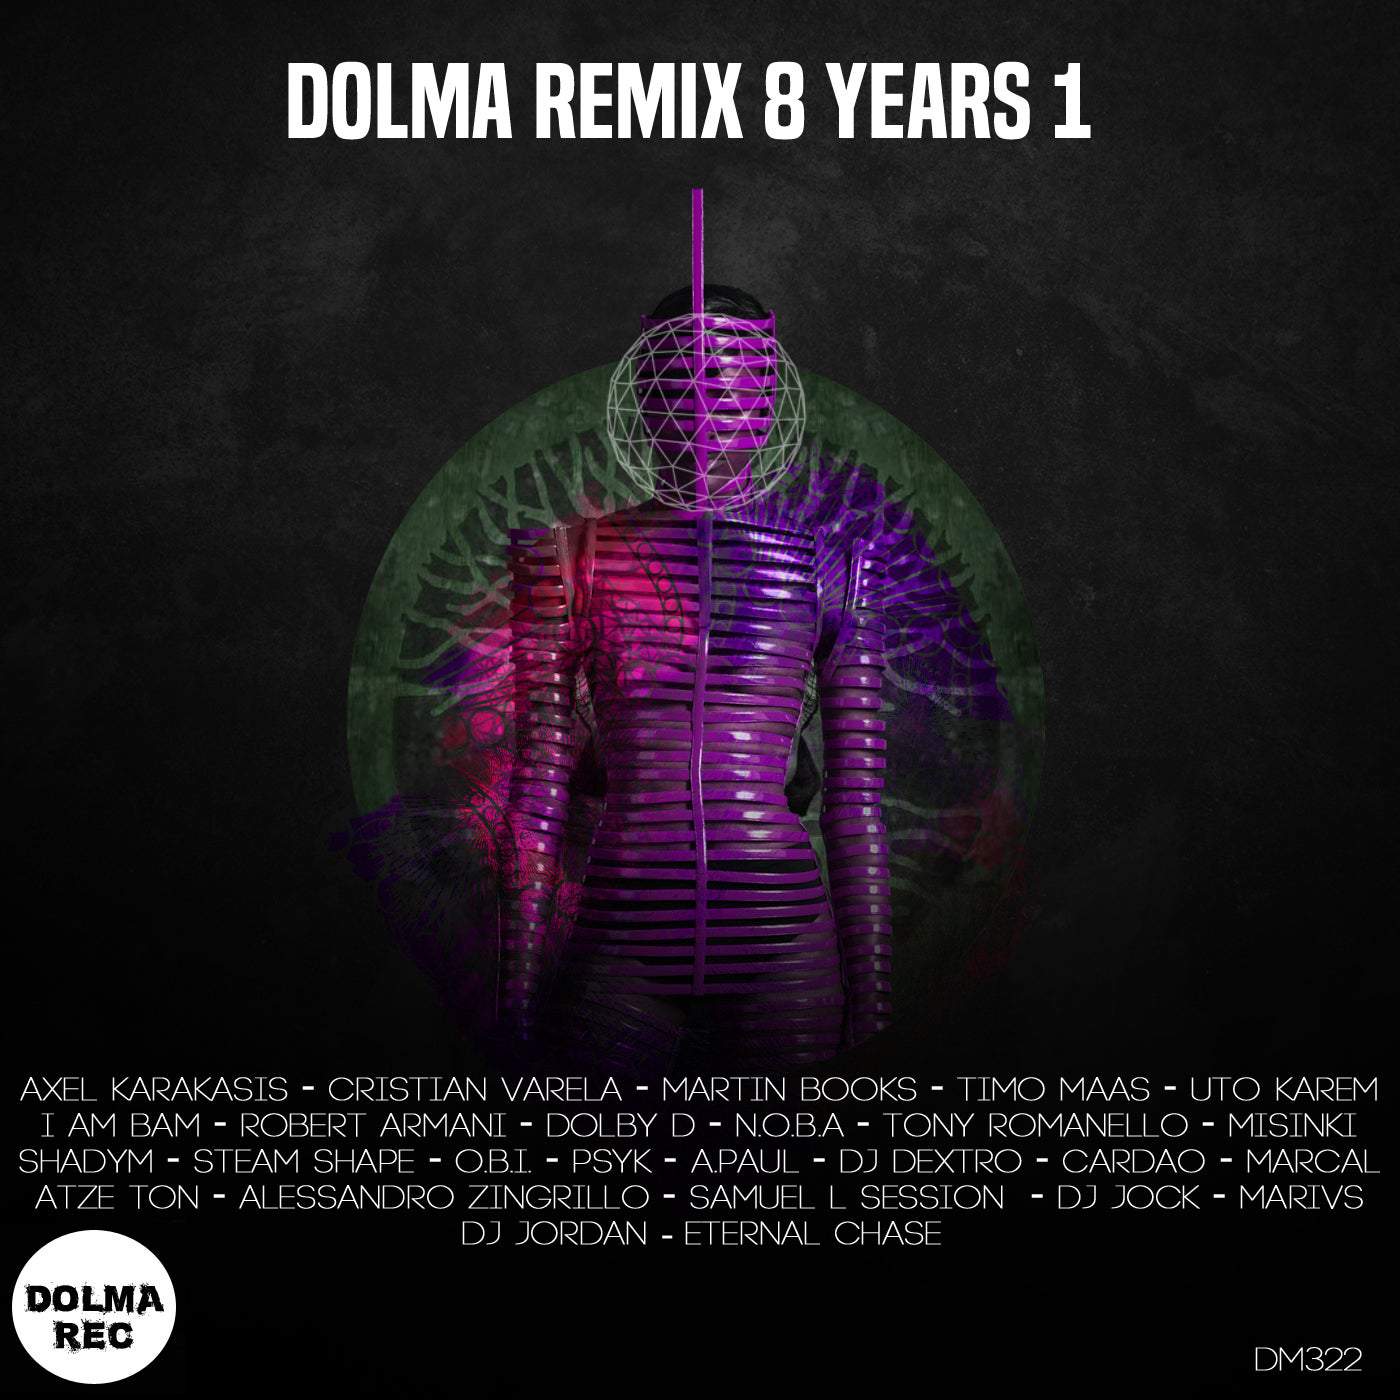 Download DOLMA RMX 8 YEARS 1 on Electrobuzz